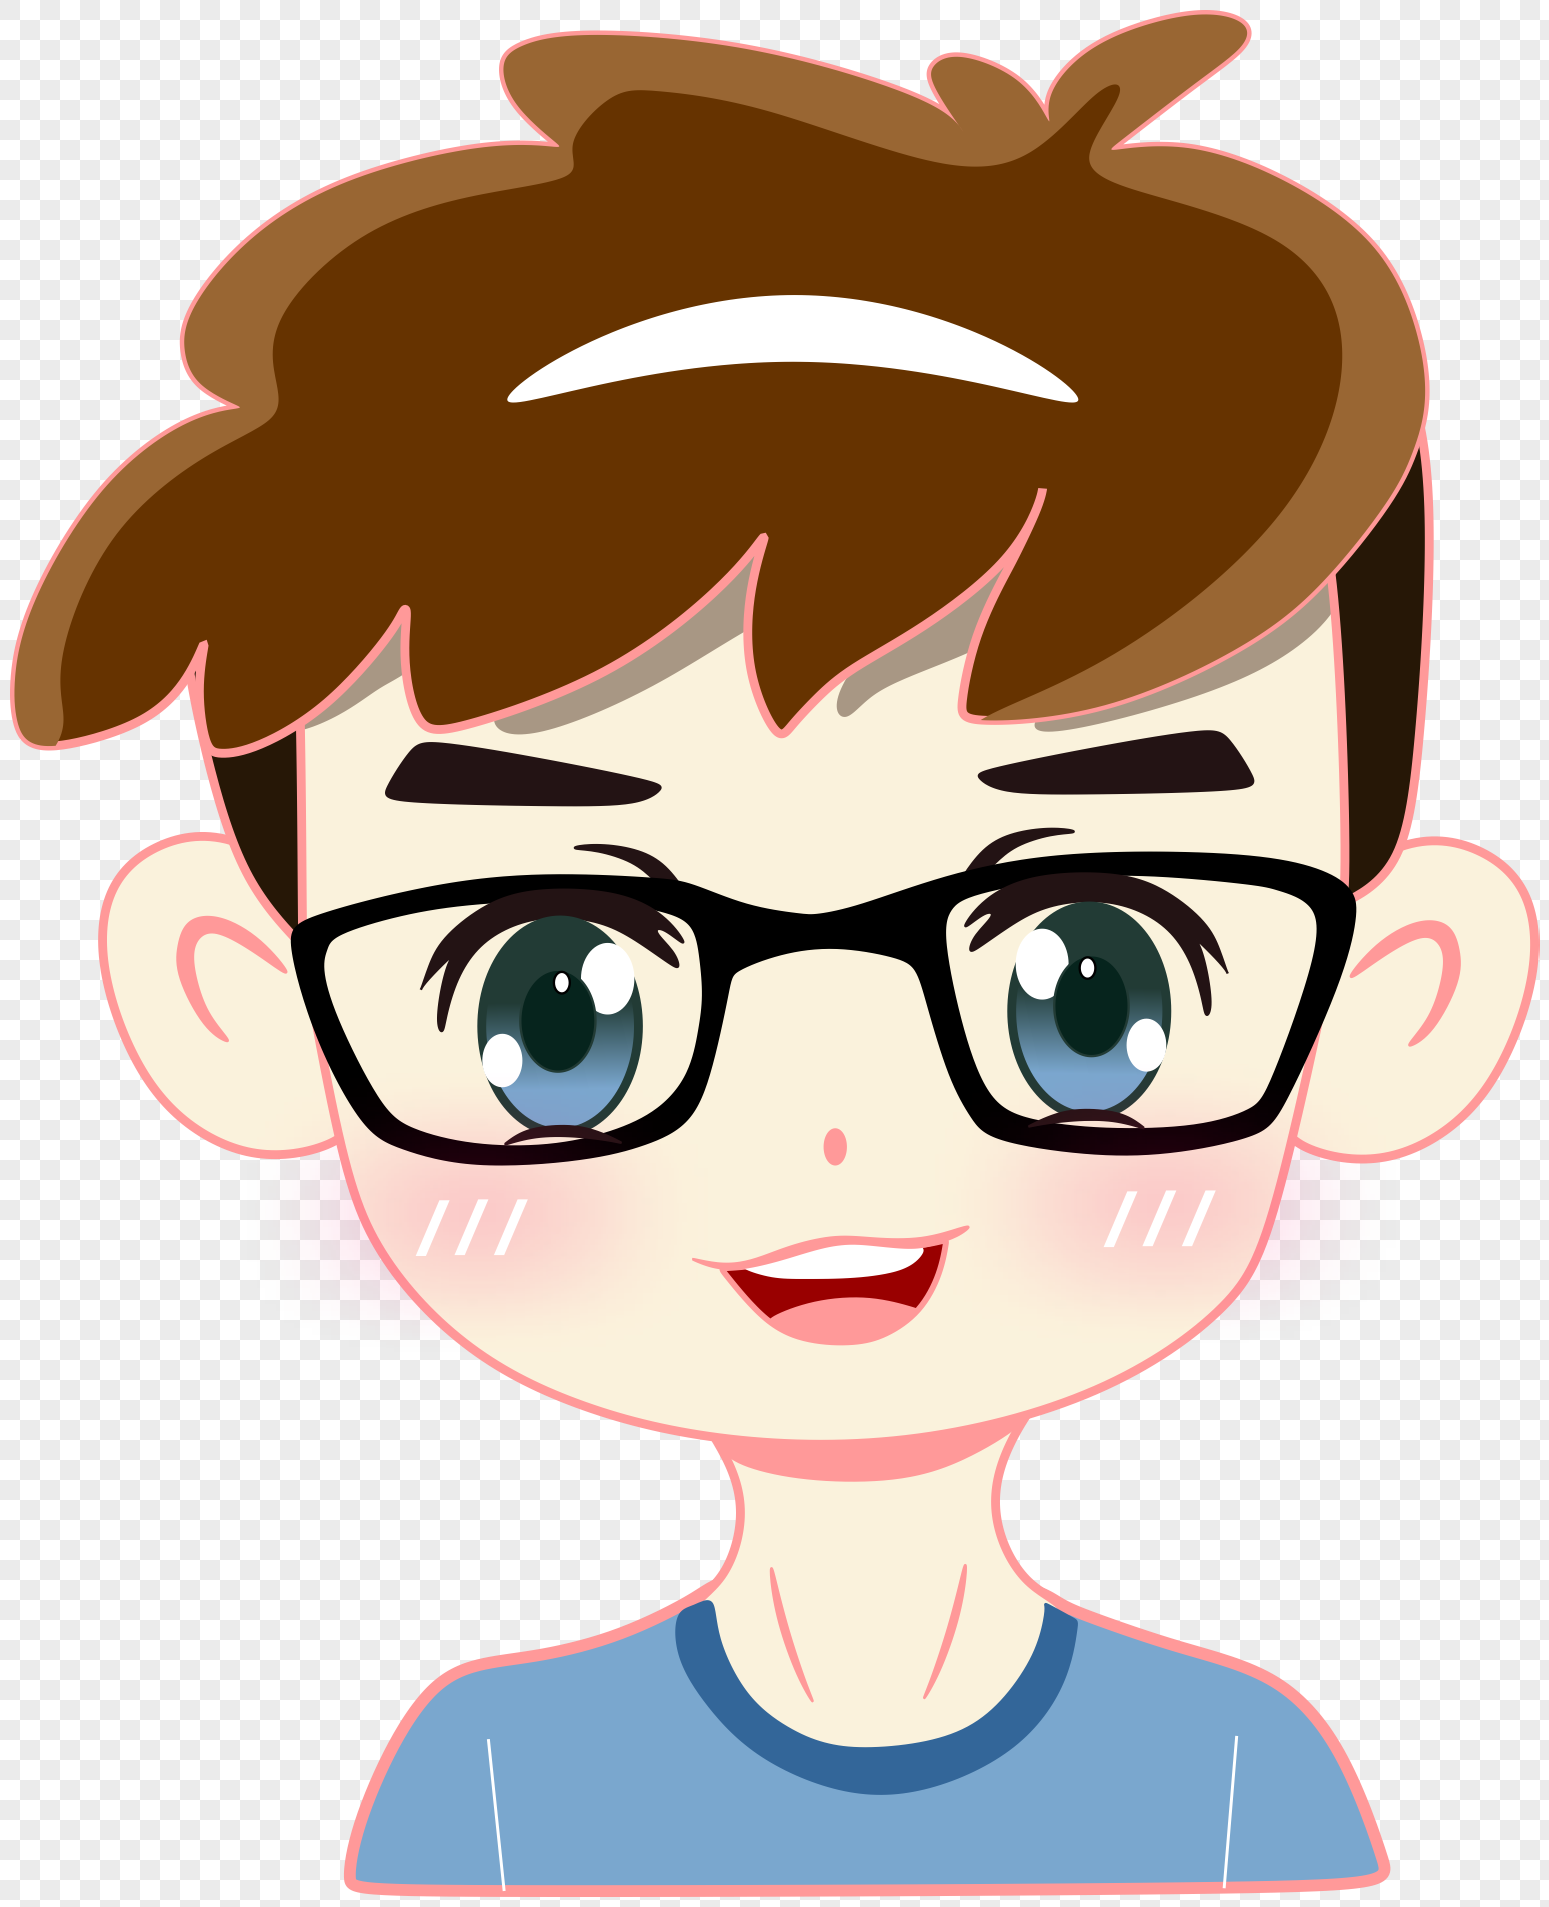 Boy Avatar PNG Image Free Download And Clipart Image For Free ...